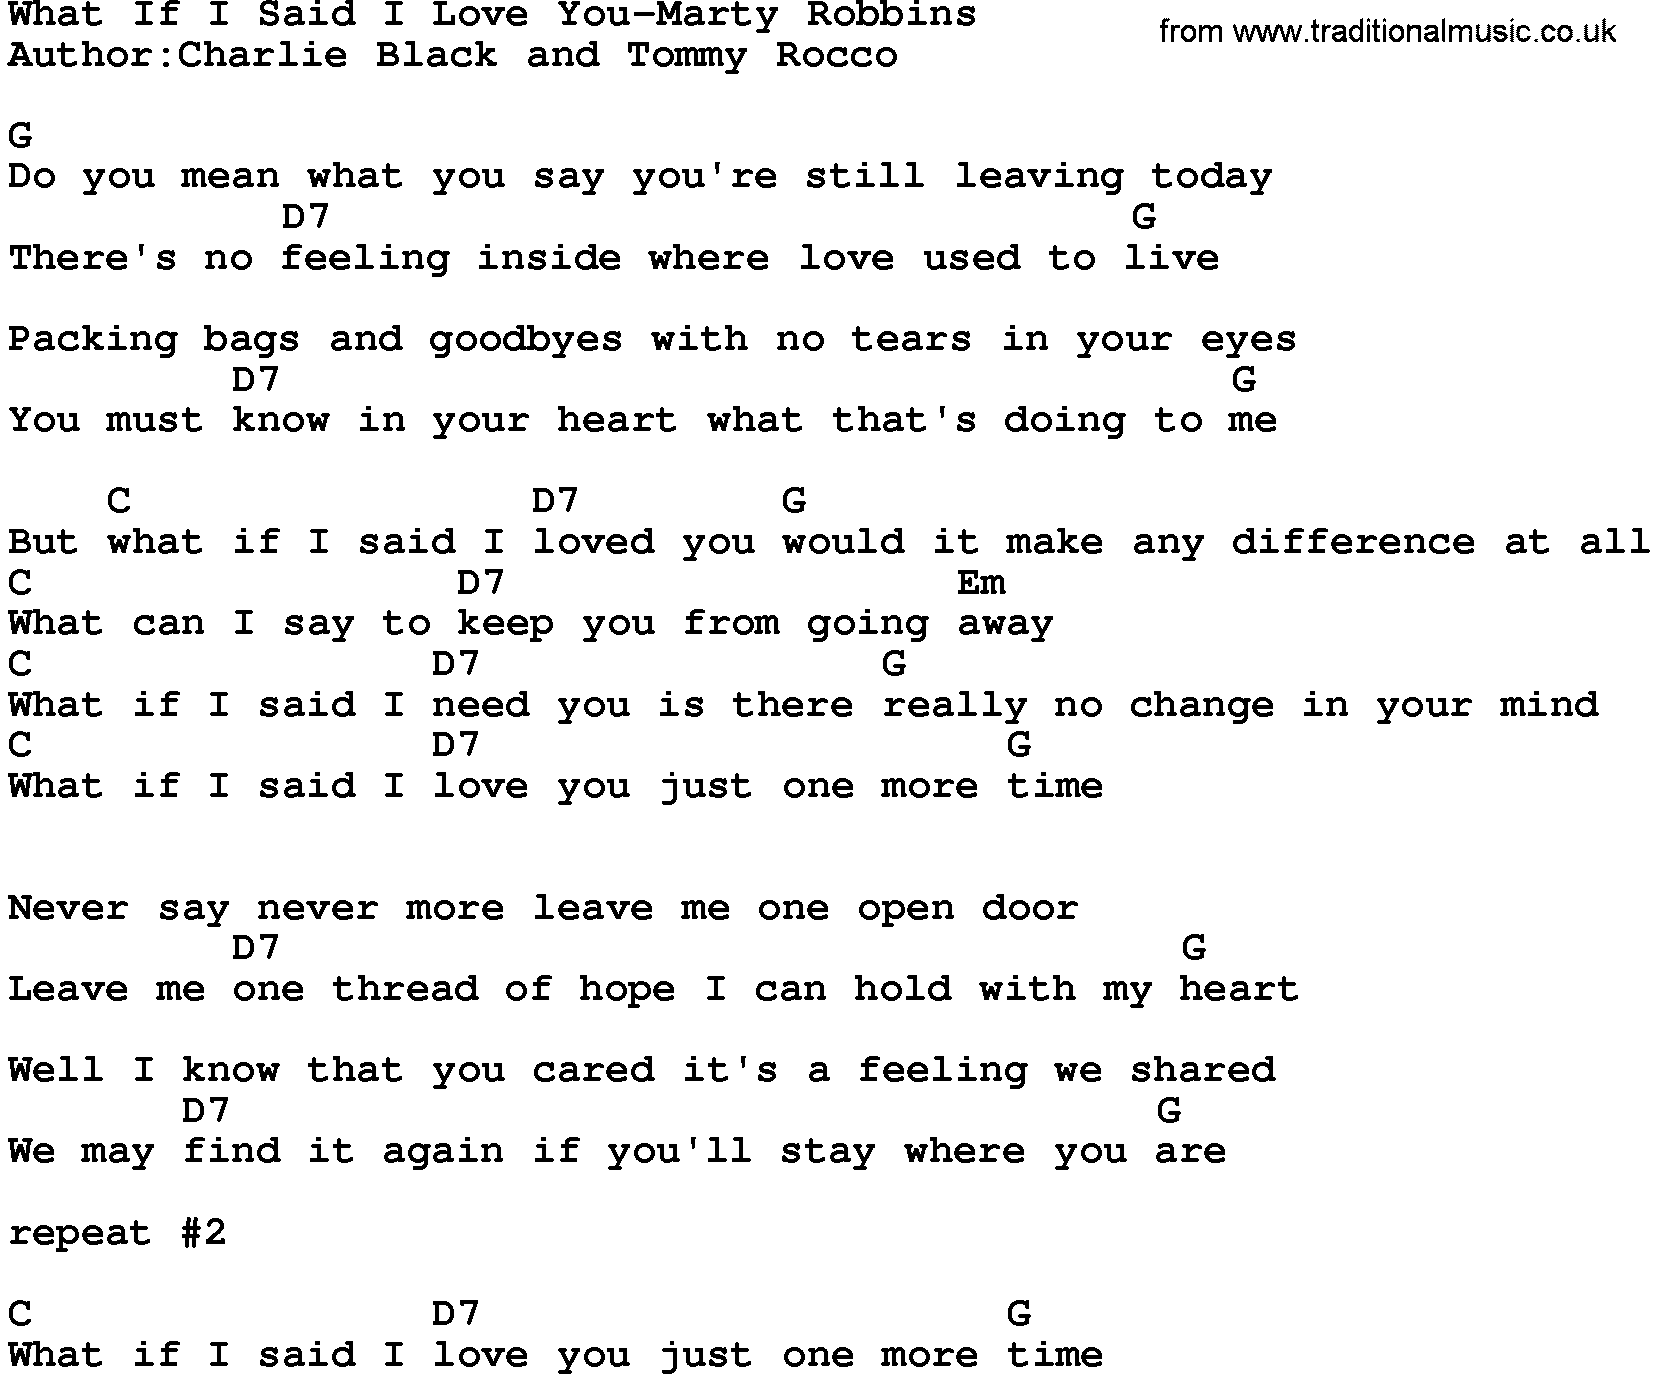 Country music song: What If I Said I Love You-Marty Robbins lyrics and chords